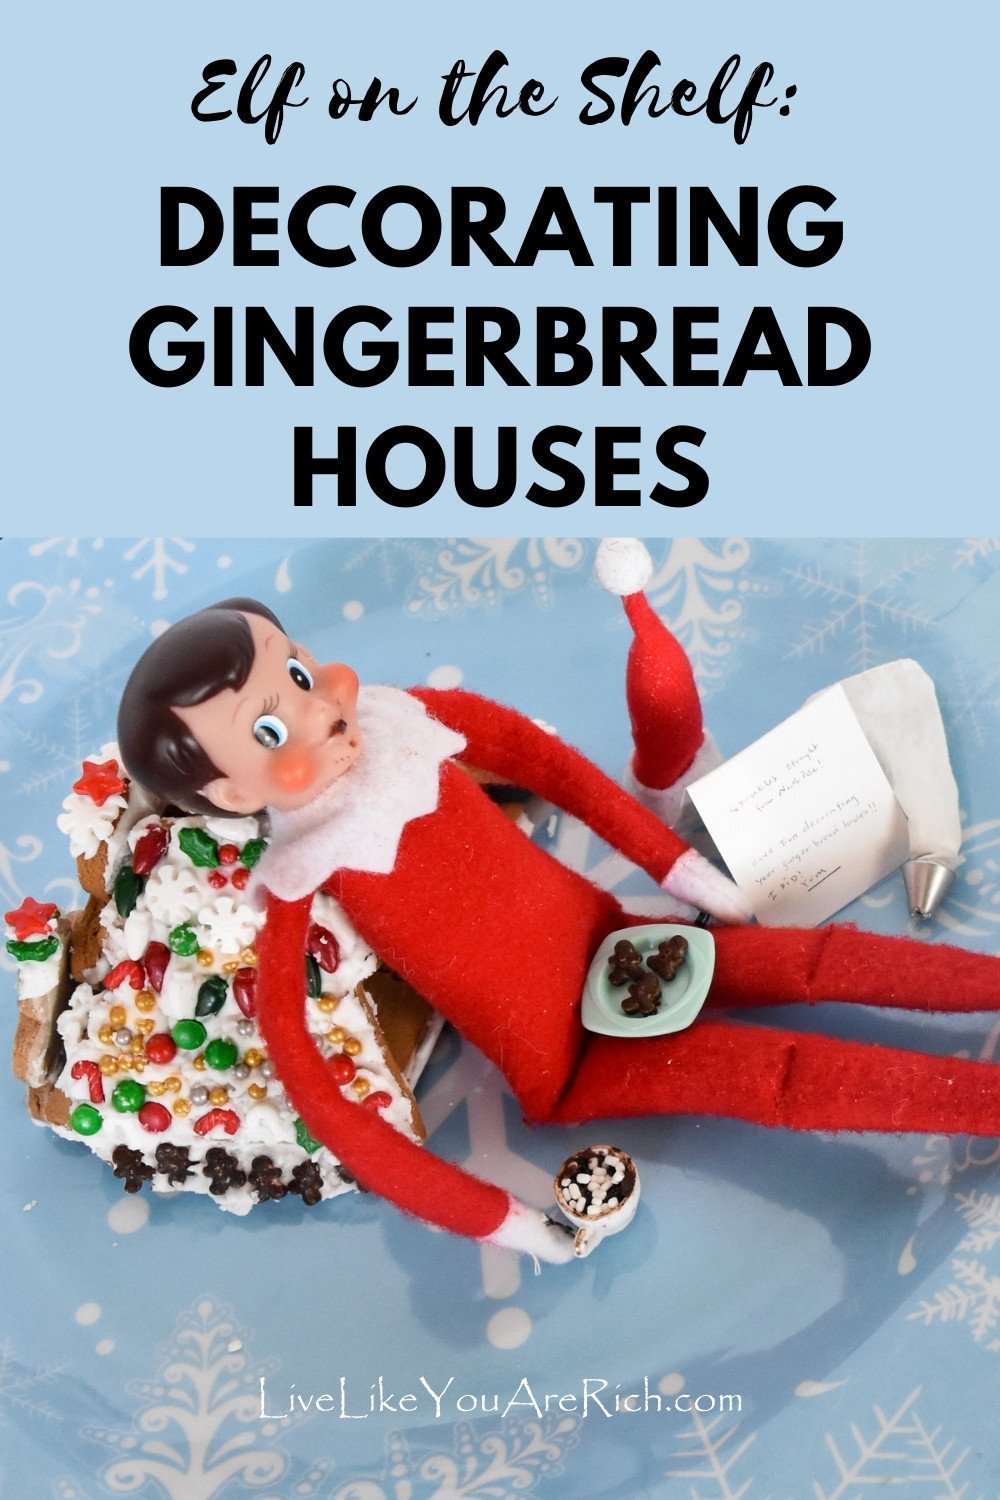 Elf on the Shelf: Decorating Gingerbread Houses